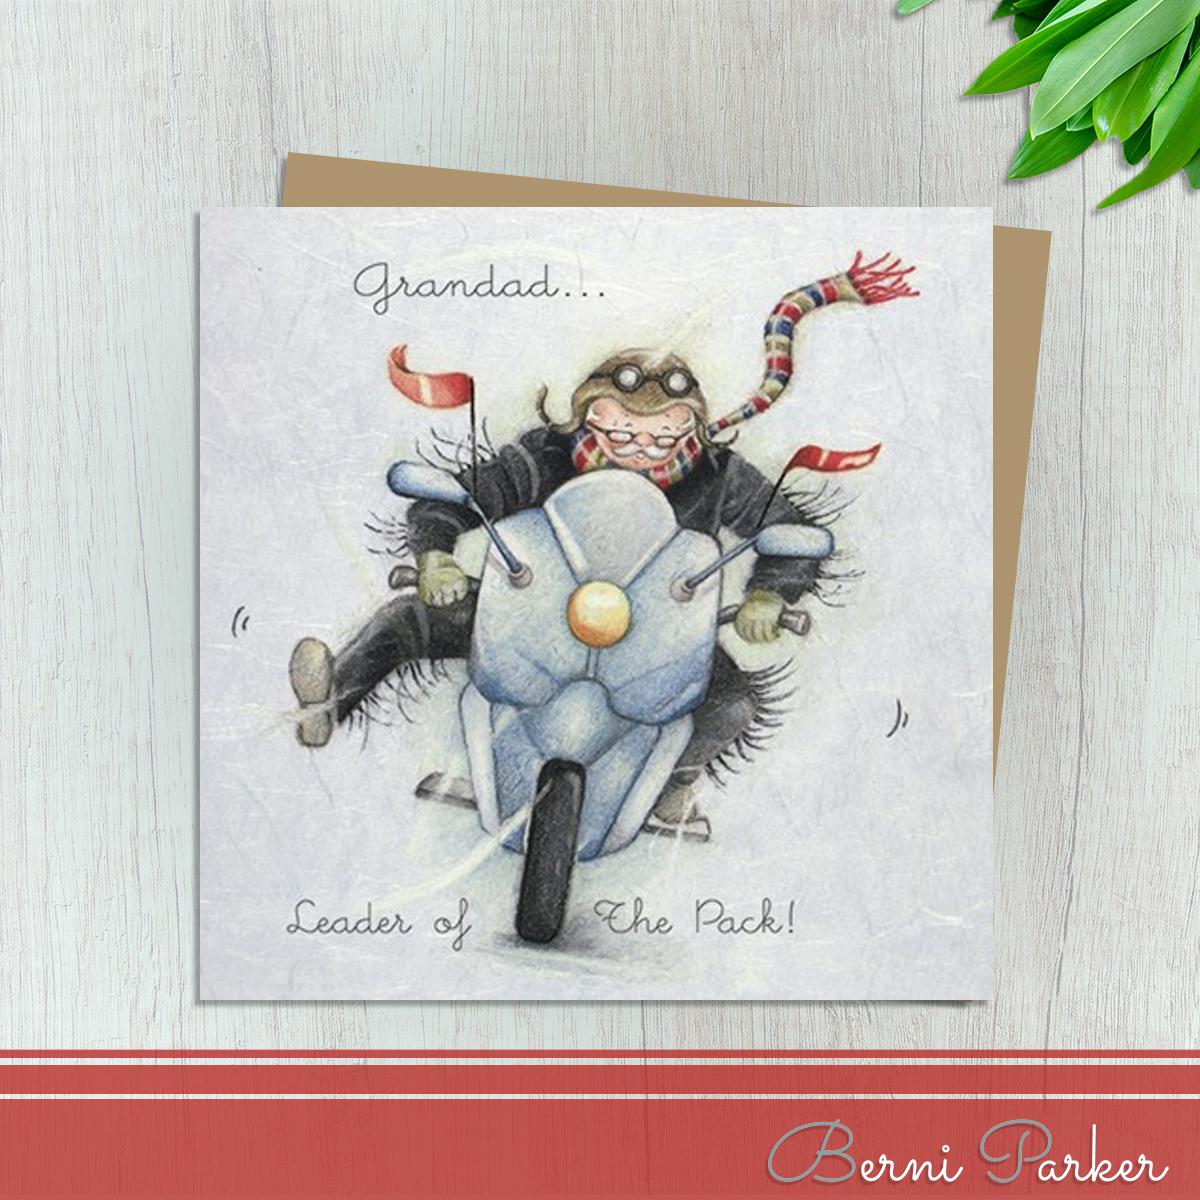 Showing Grandad Driving At Speed On A Motorbike. Caption: Grandad...Leader Of the pack! Blank inside For Own Message. Complete With Brown Kraft Envelope